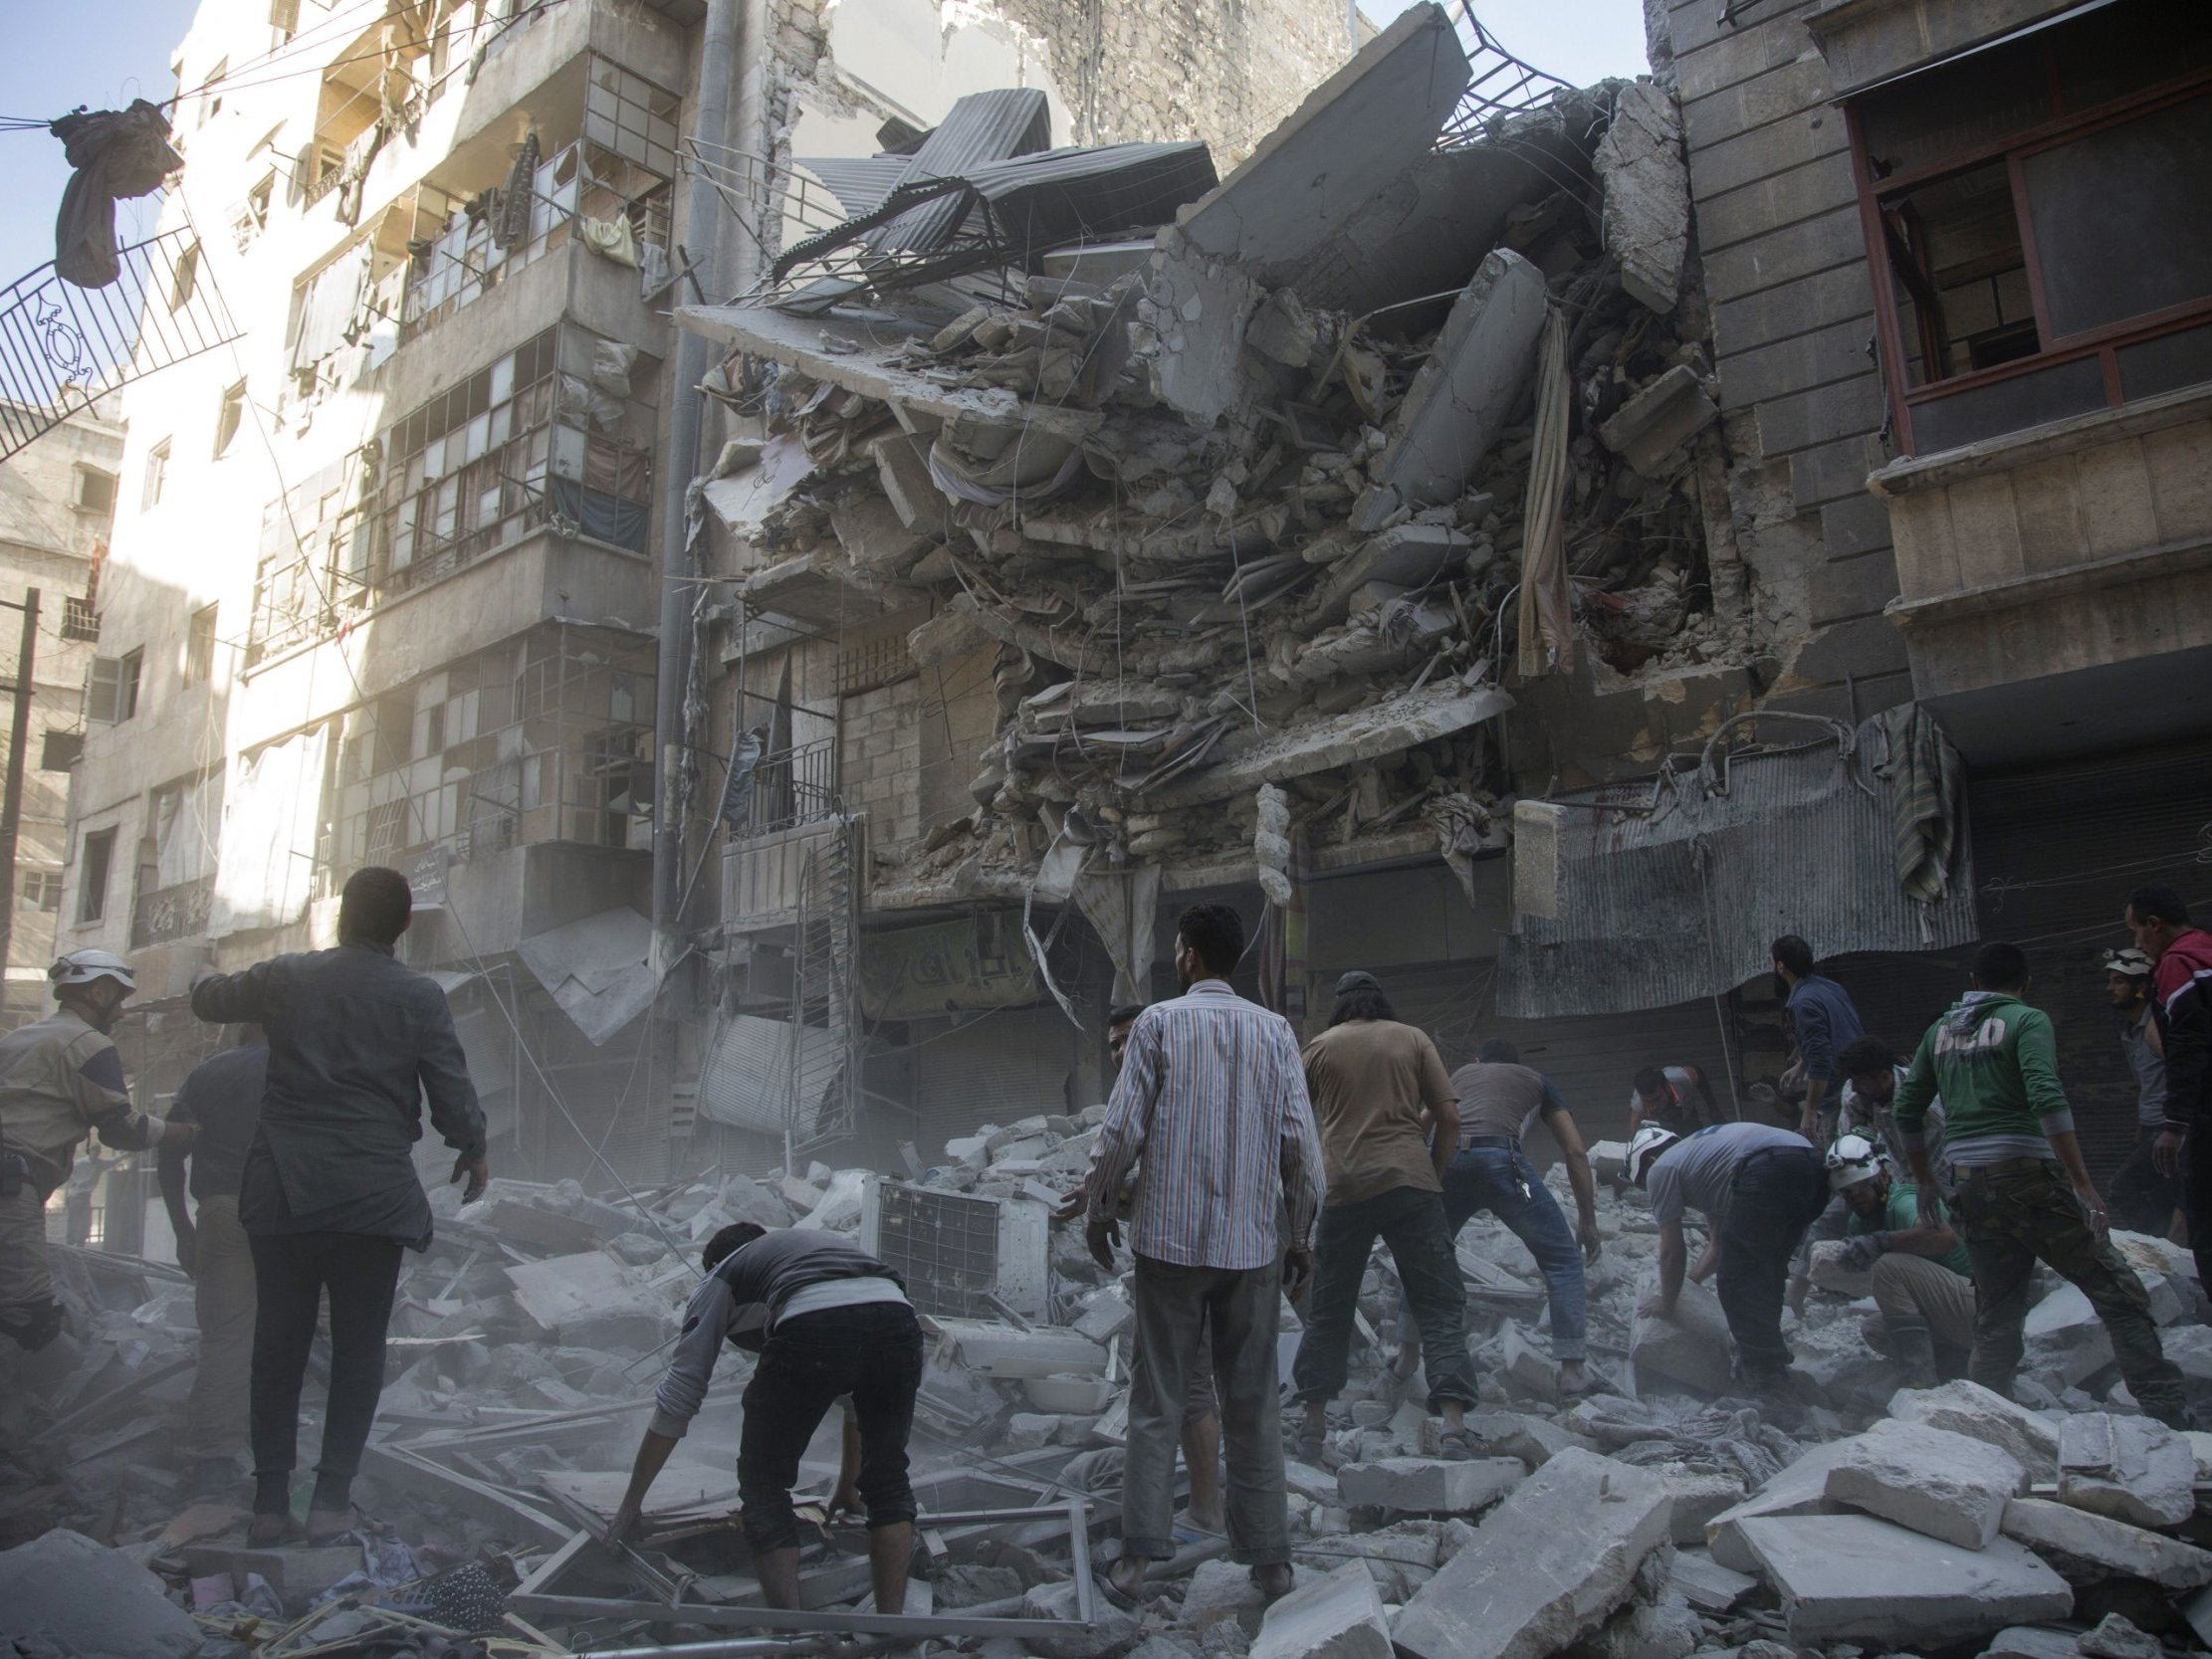 Destruction in Syria, where civil war has seen cities leveled and thousands killed